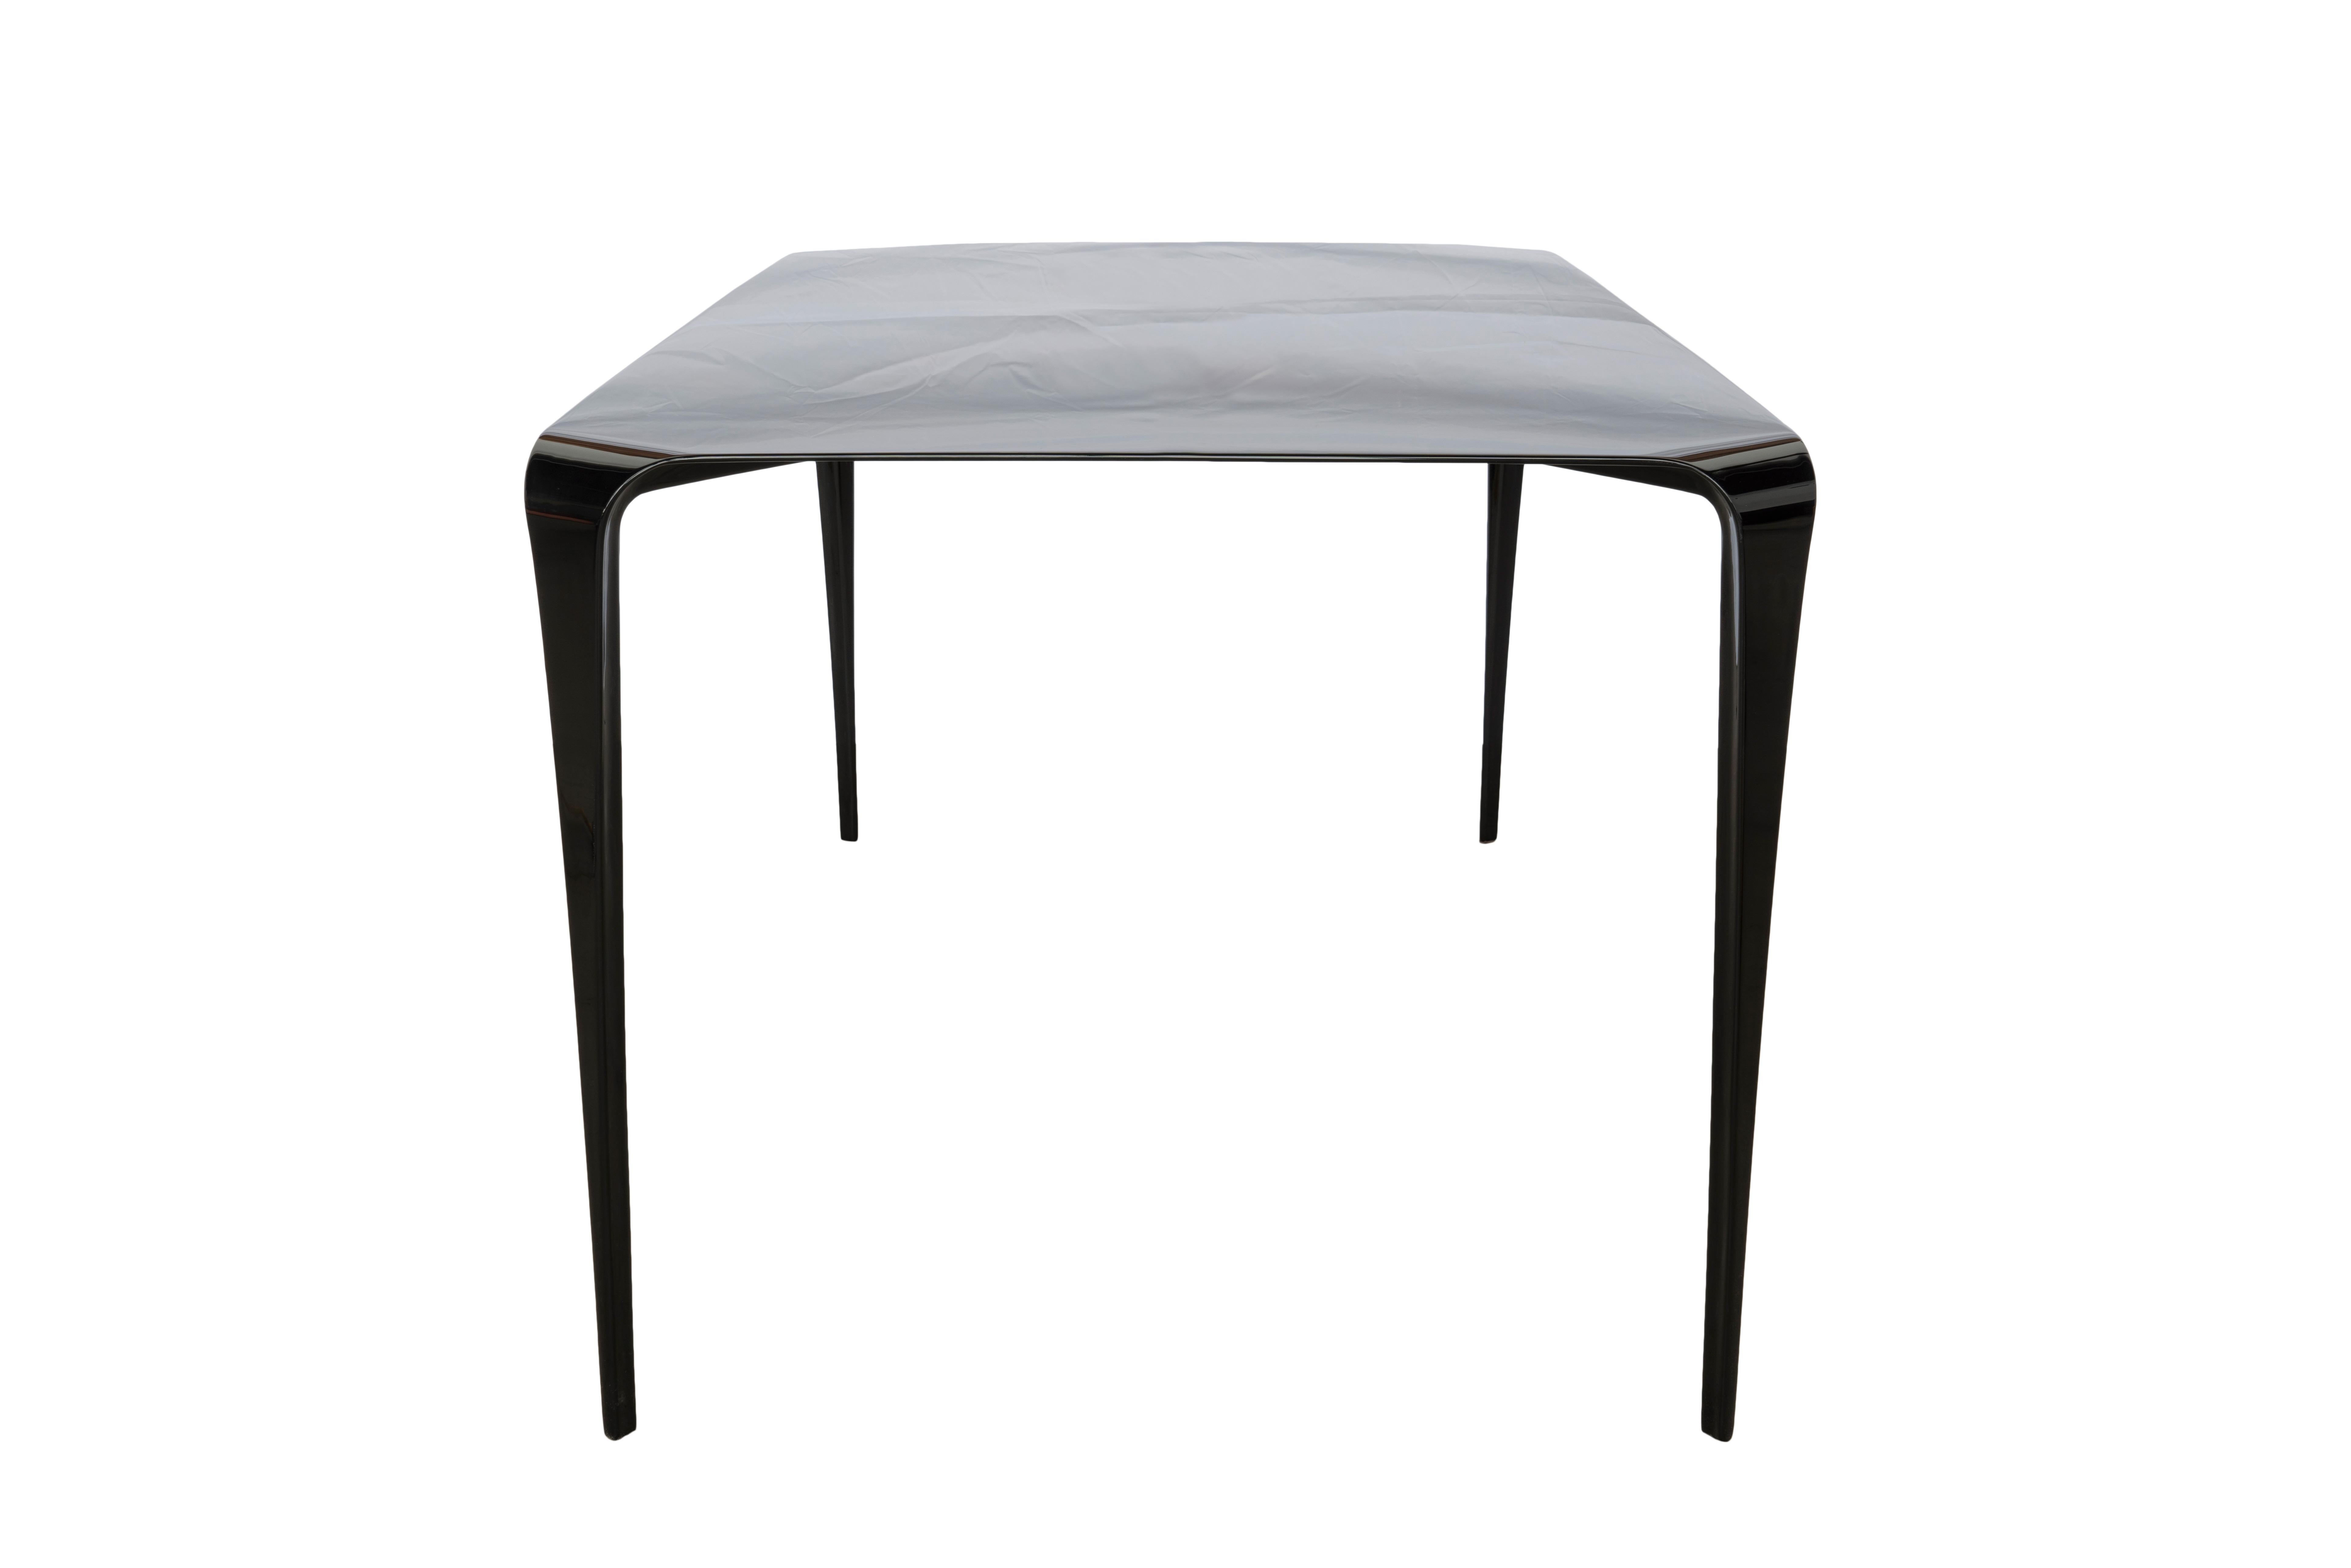 American FLO - Metal dining room table with stiletto legs and custom finishes For Sale